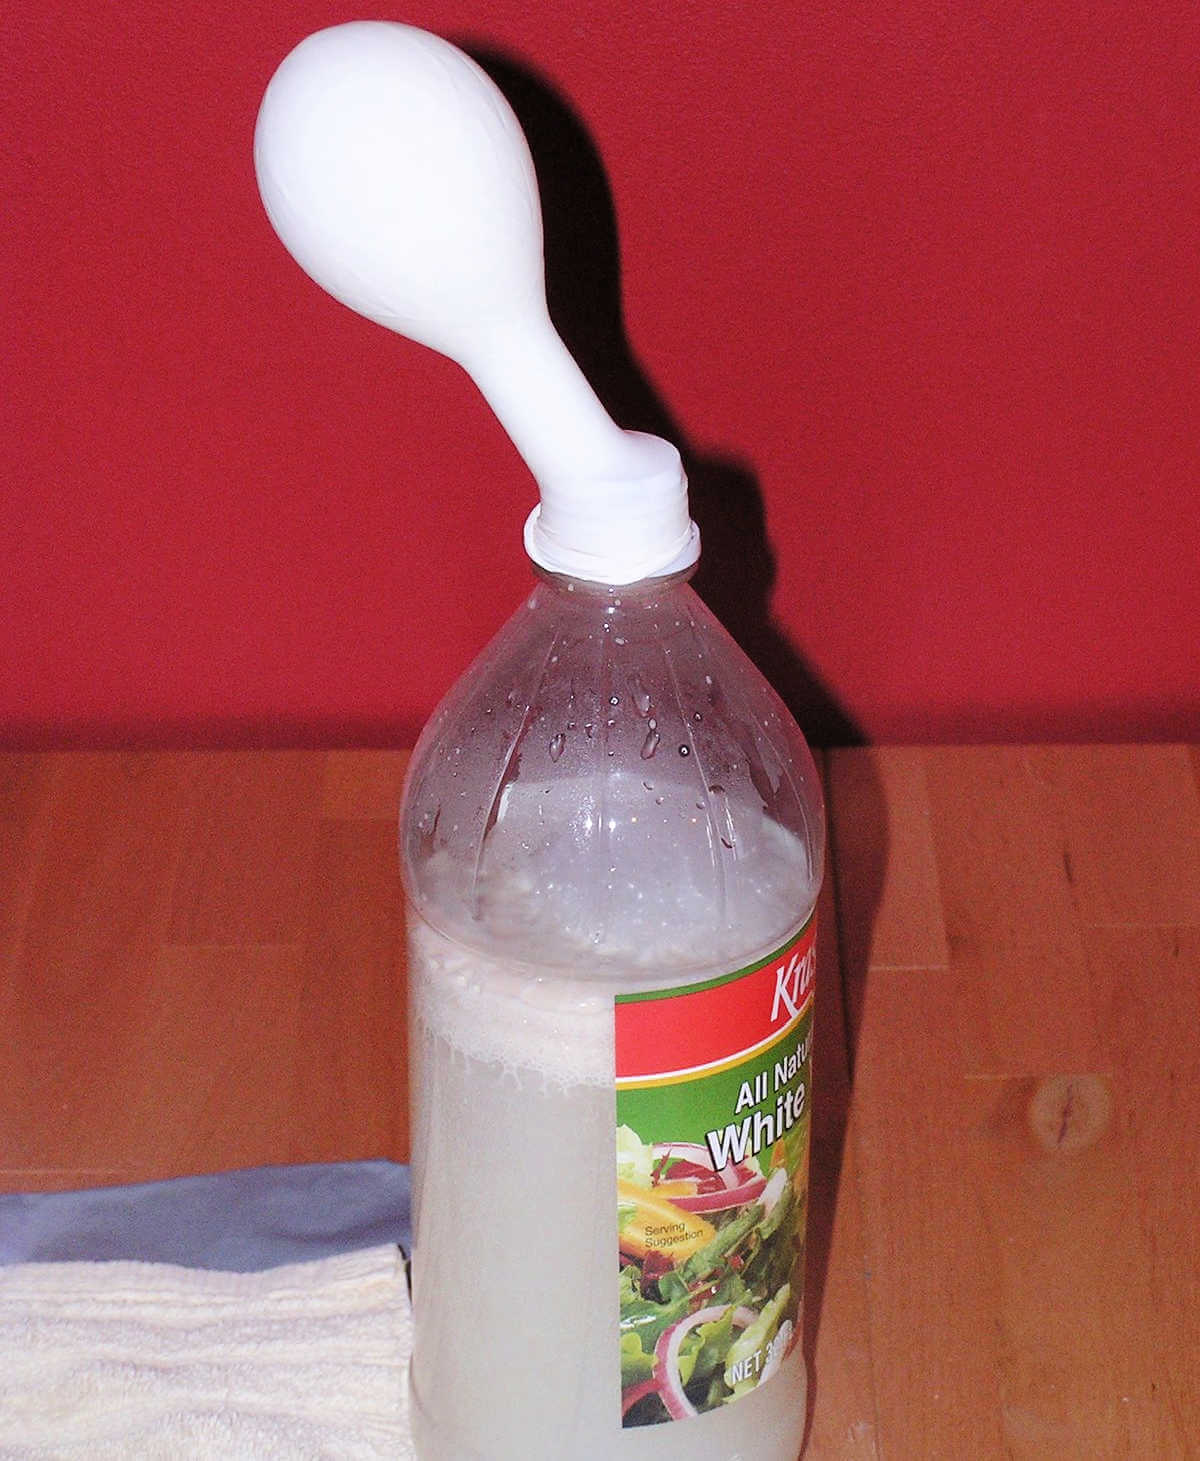 Small white balloon on next of bottle standing upright and slightly inflated.